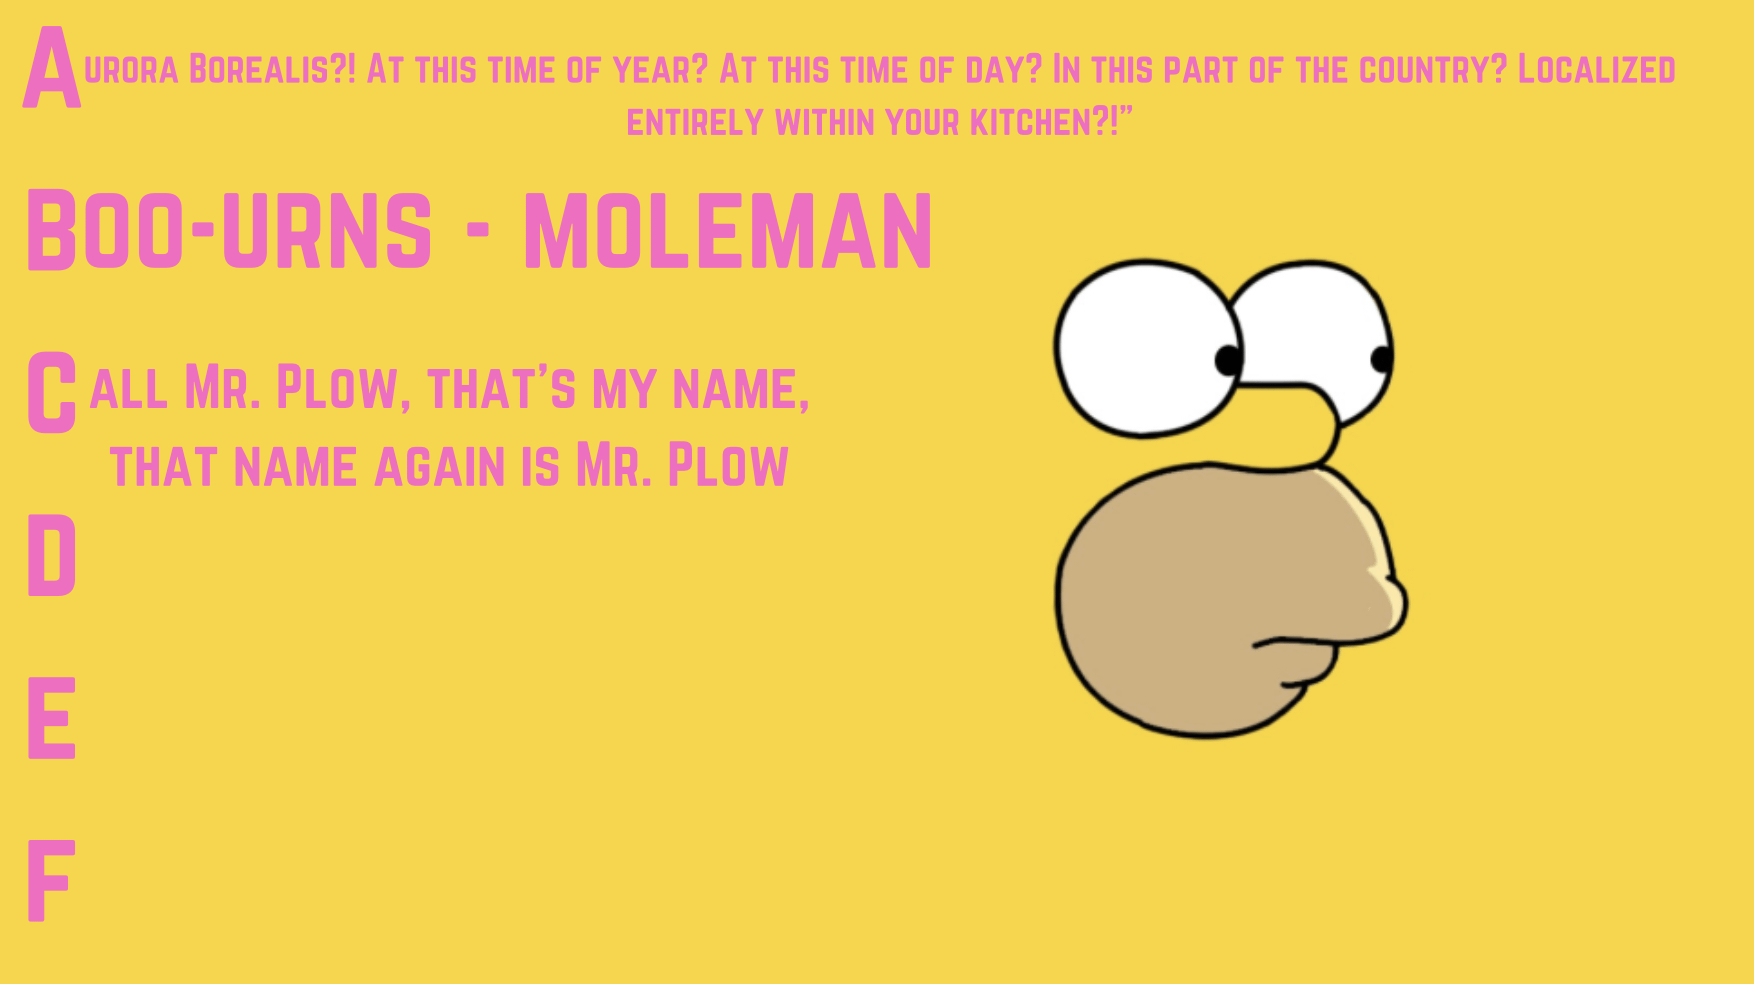 Time for D write your favorite quote from the Simpsons that starts with D